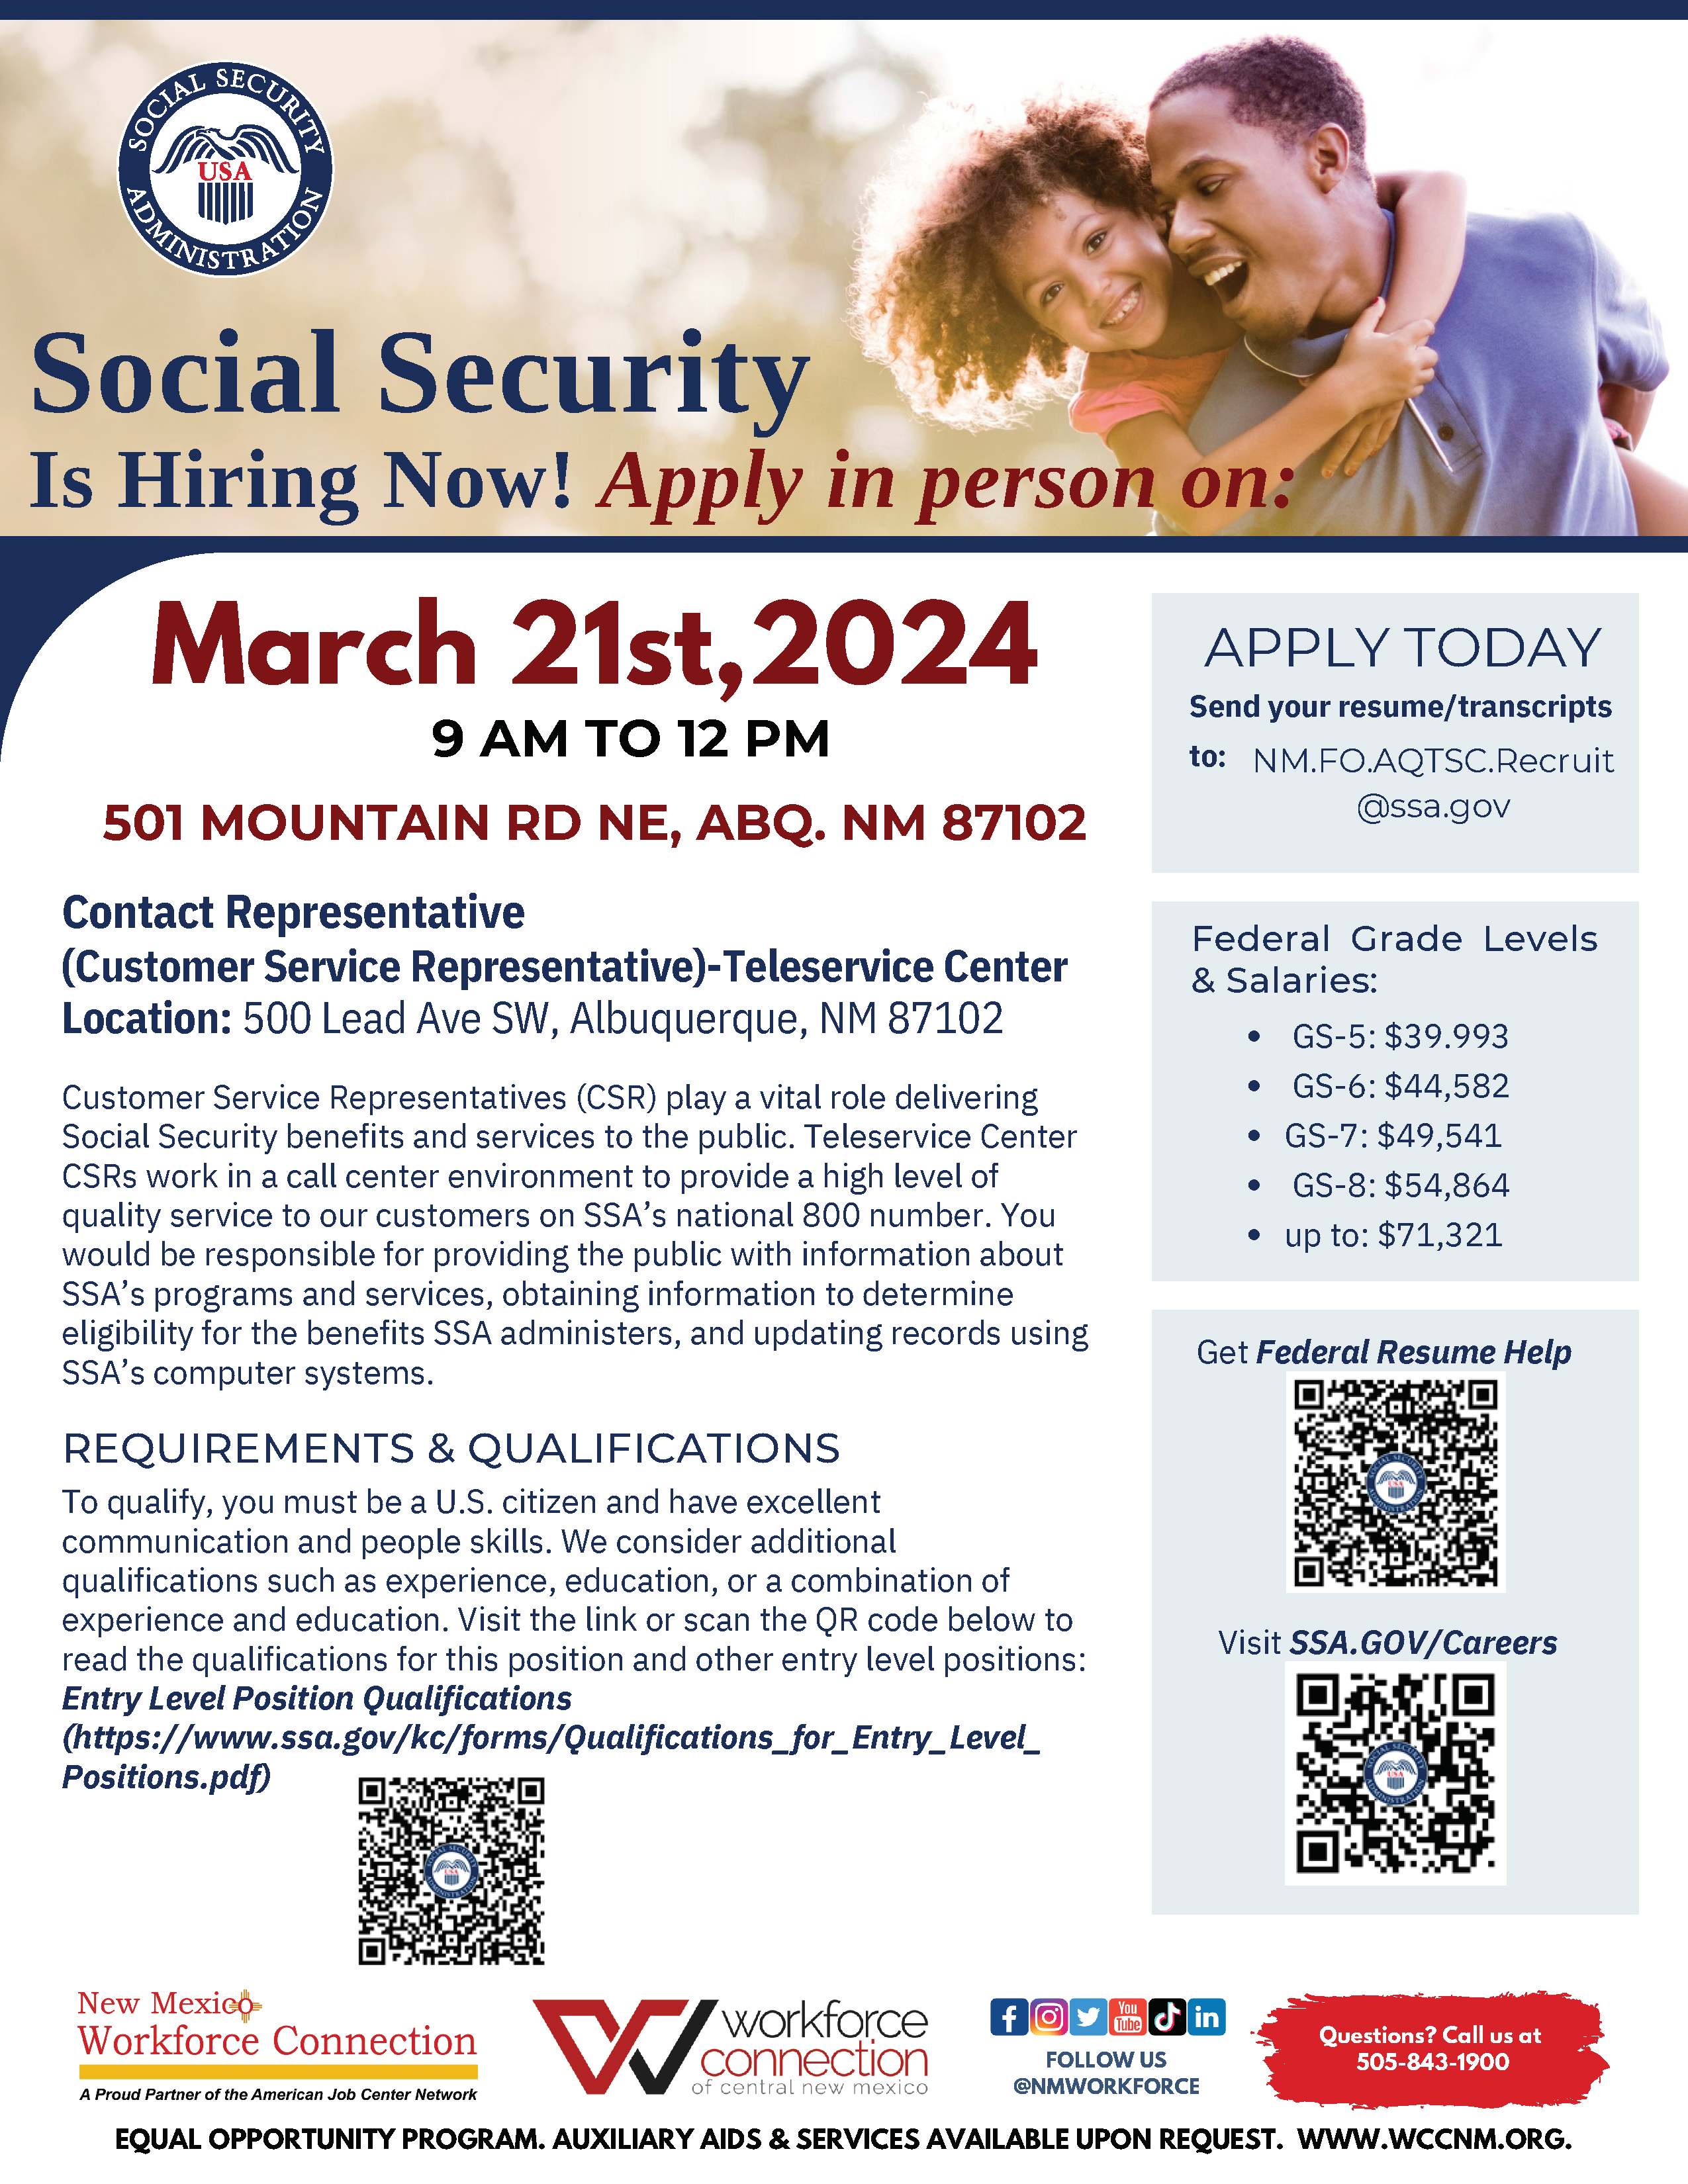 Social Security is Hiring Now flyer